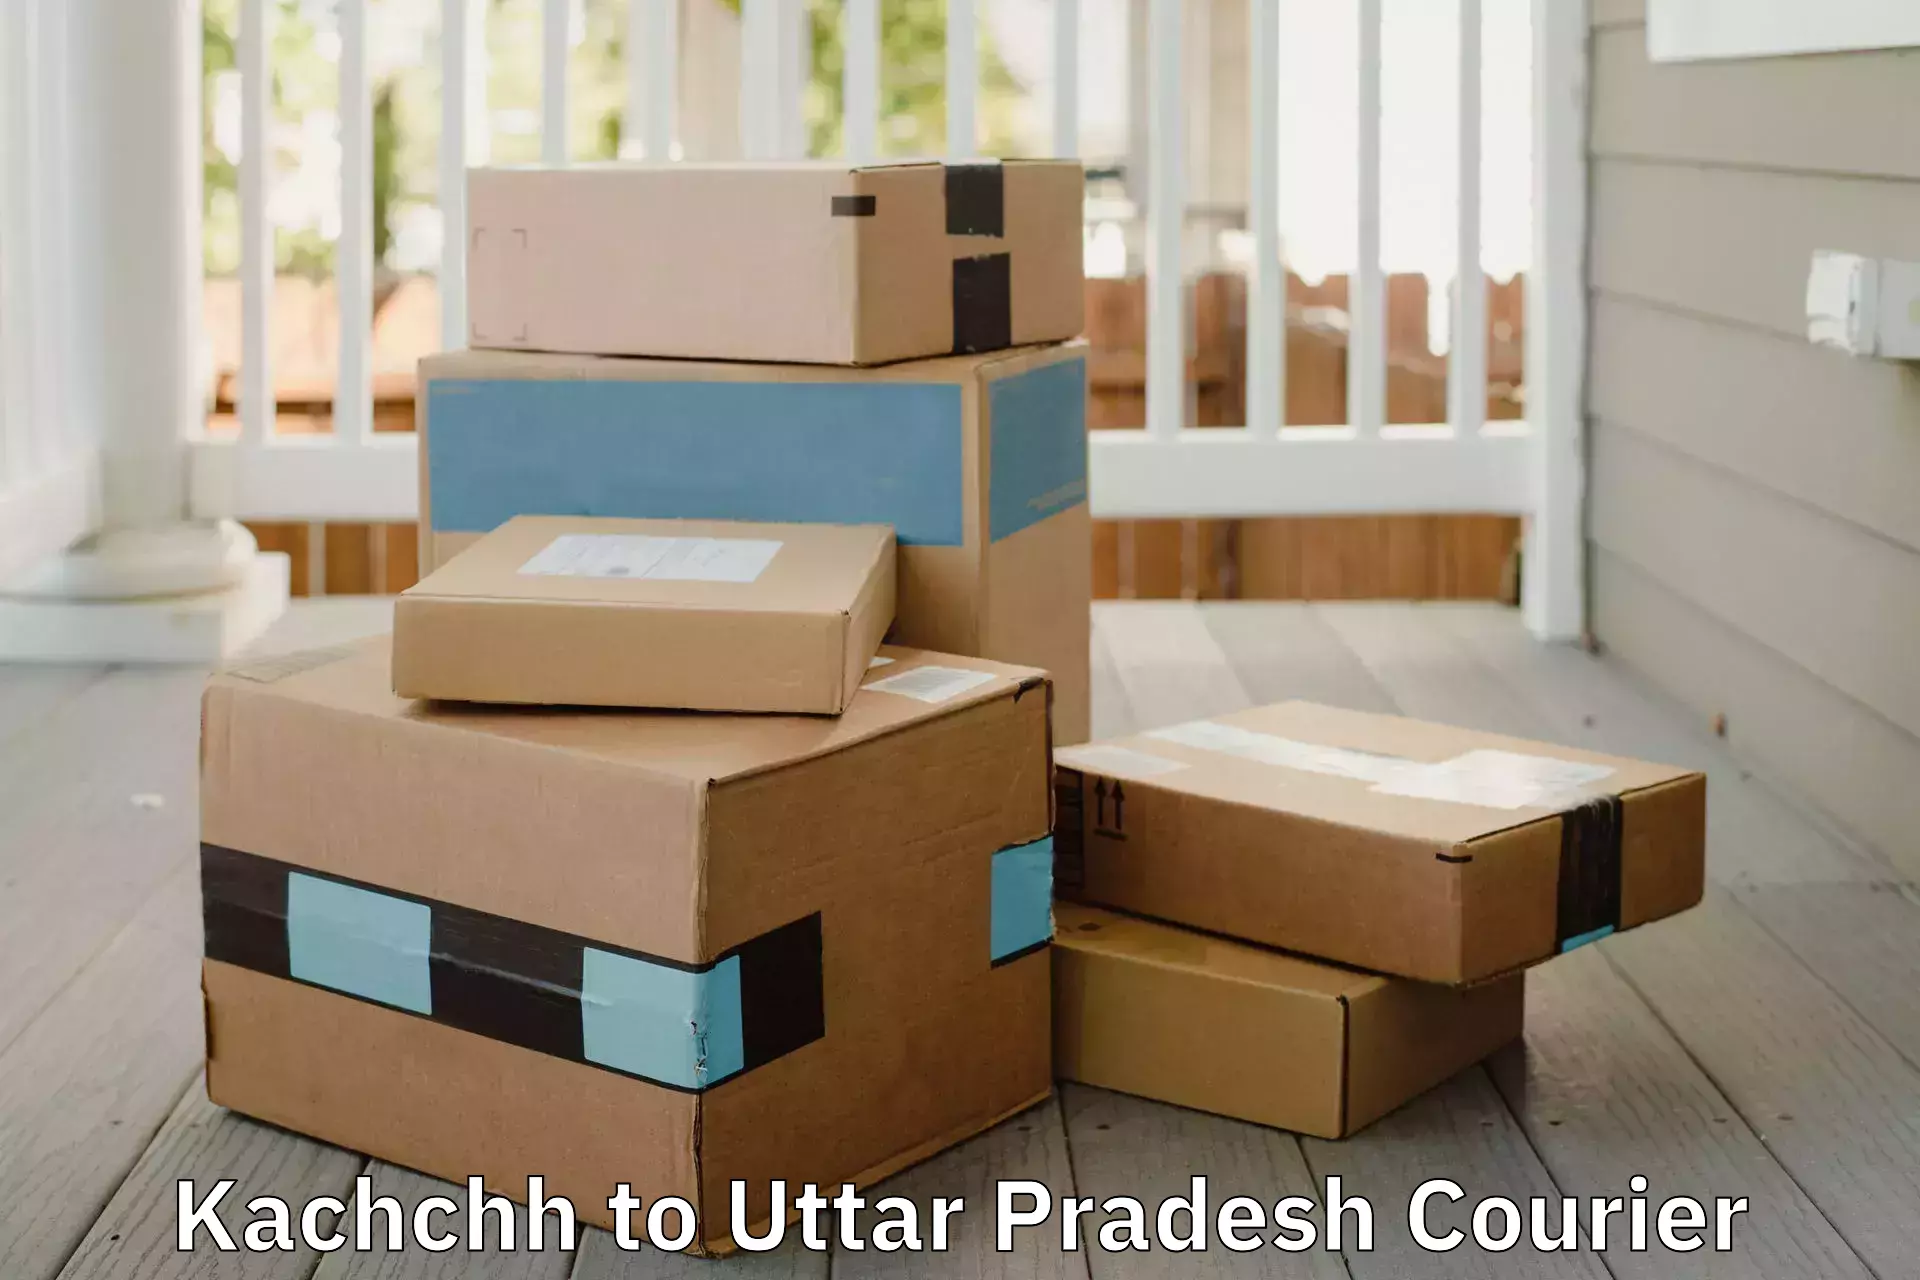 Quality household transport Kachchh to Fatehabad Agra